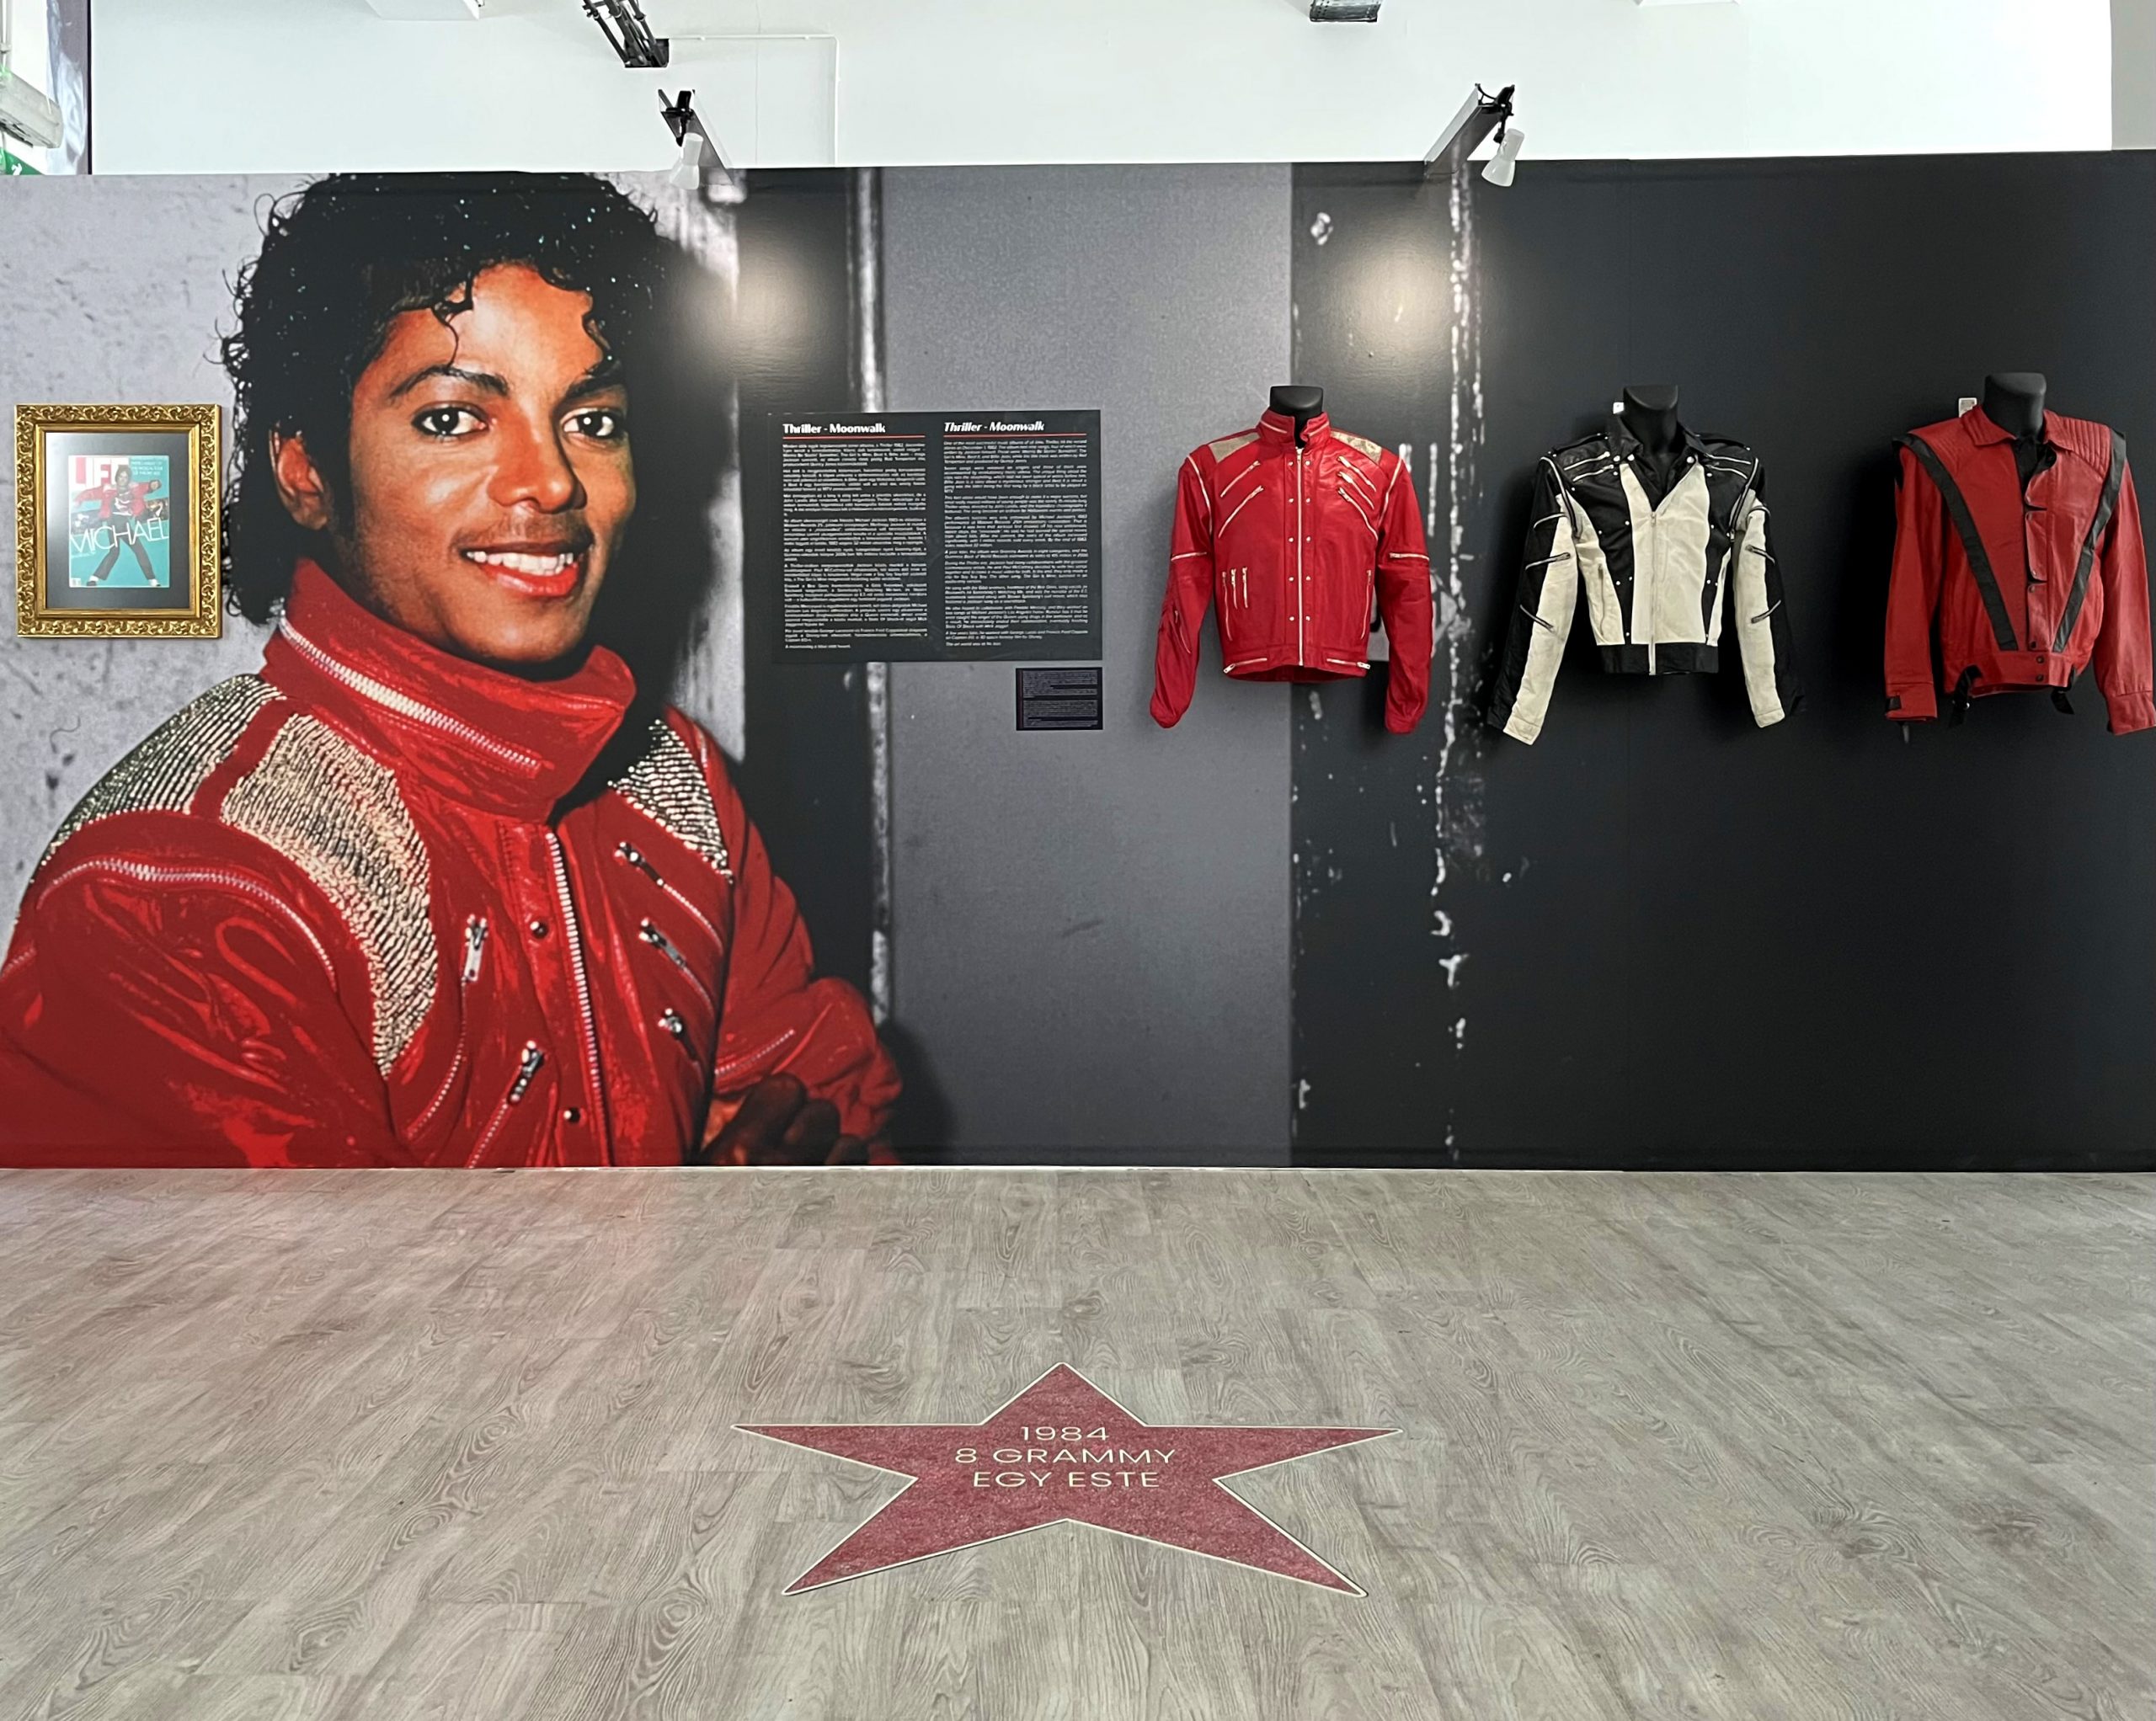 New Michael Jackson Exhibition Unveiled in Budapest